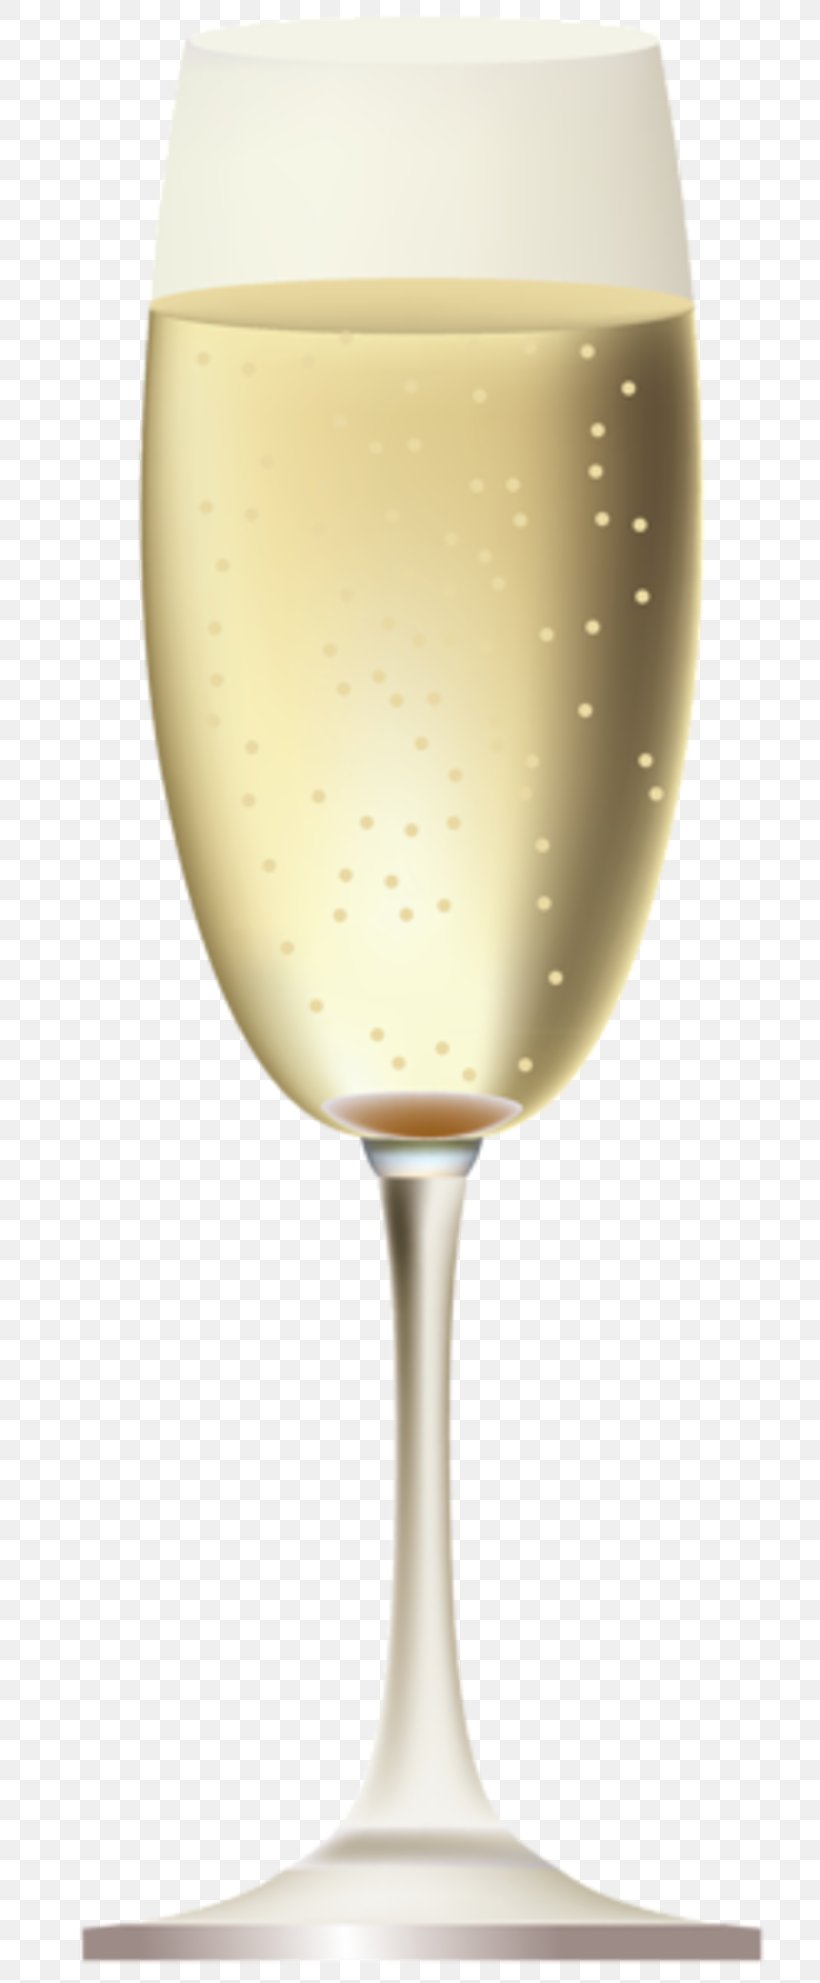 Champagne Glass Sparkling Wine White Wine, PNG, 800x1983px, Champagne, Alcoholic Drink, Beer Glass, Bottle, Champagne Glass Download Free